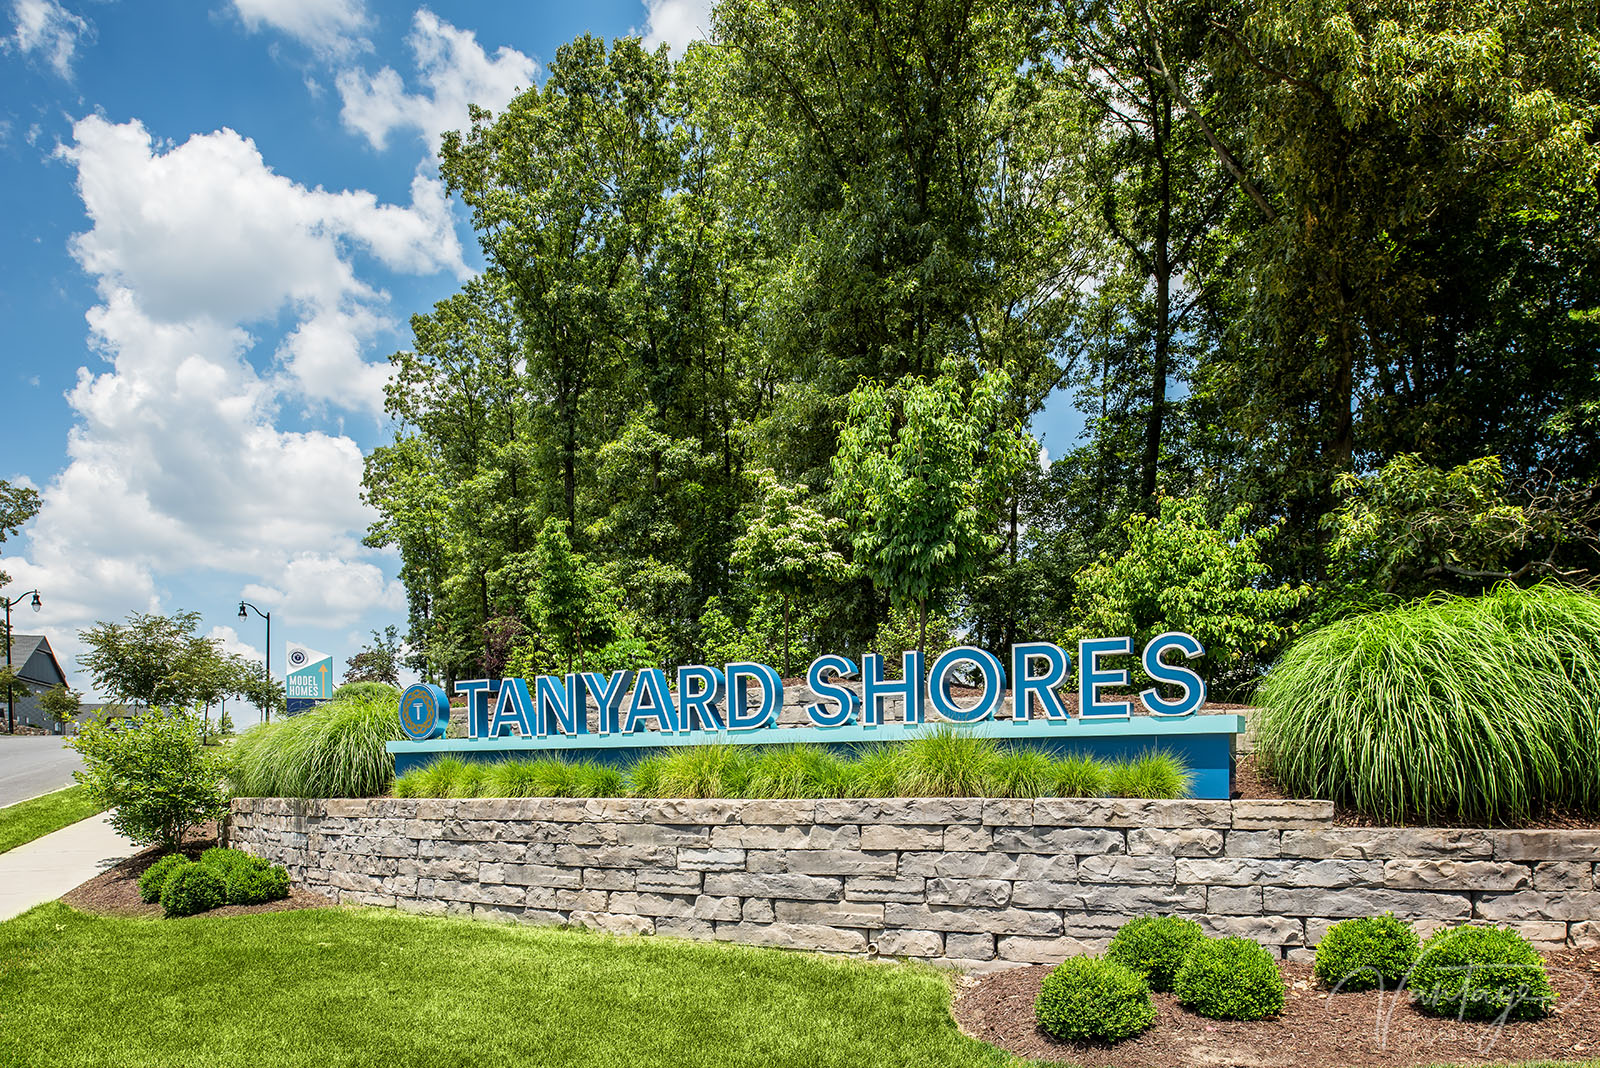 Tanyard Shores Entrance Monument for Ryan Homes